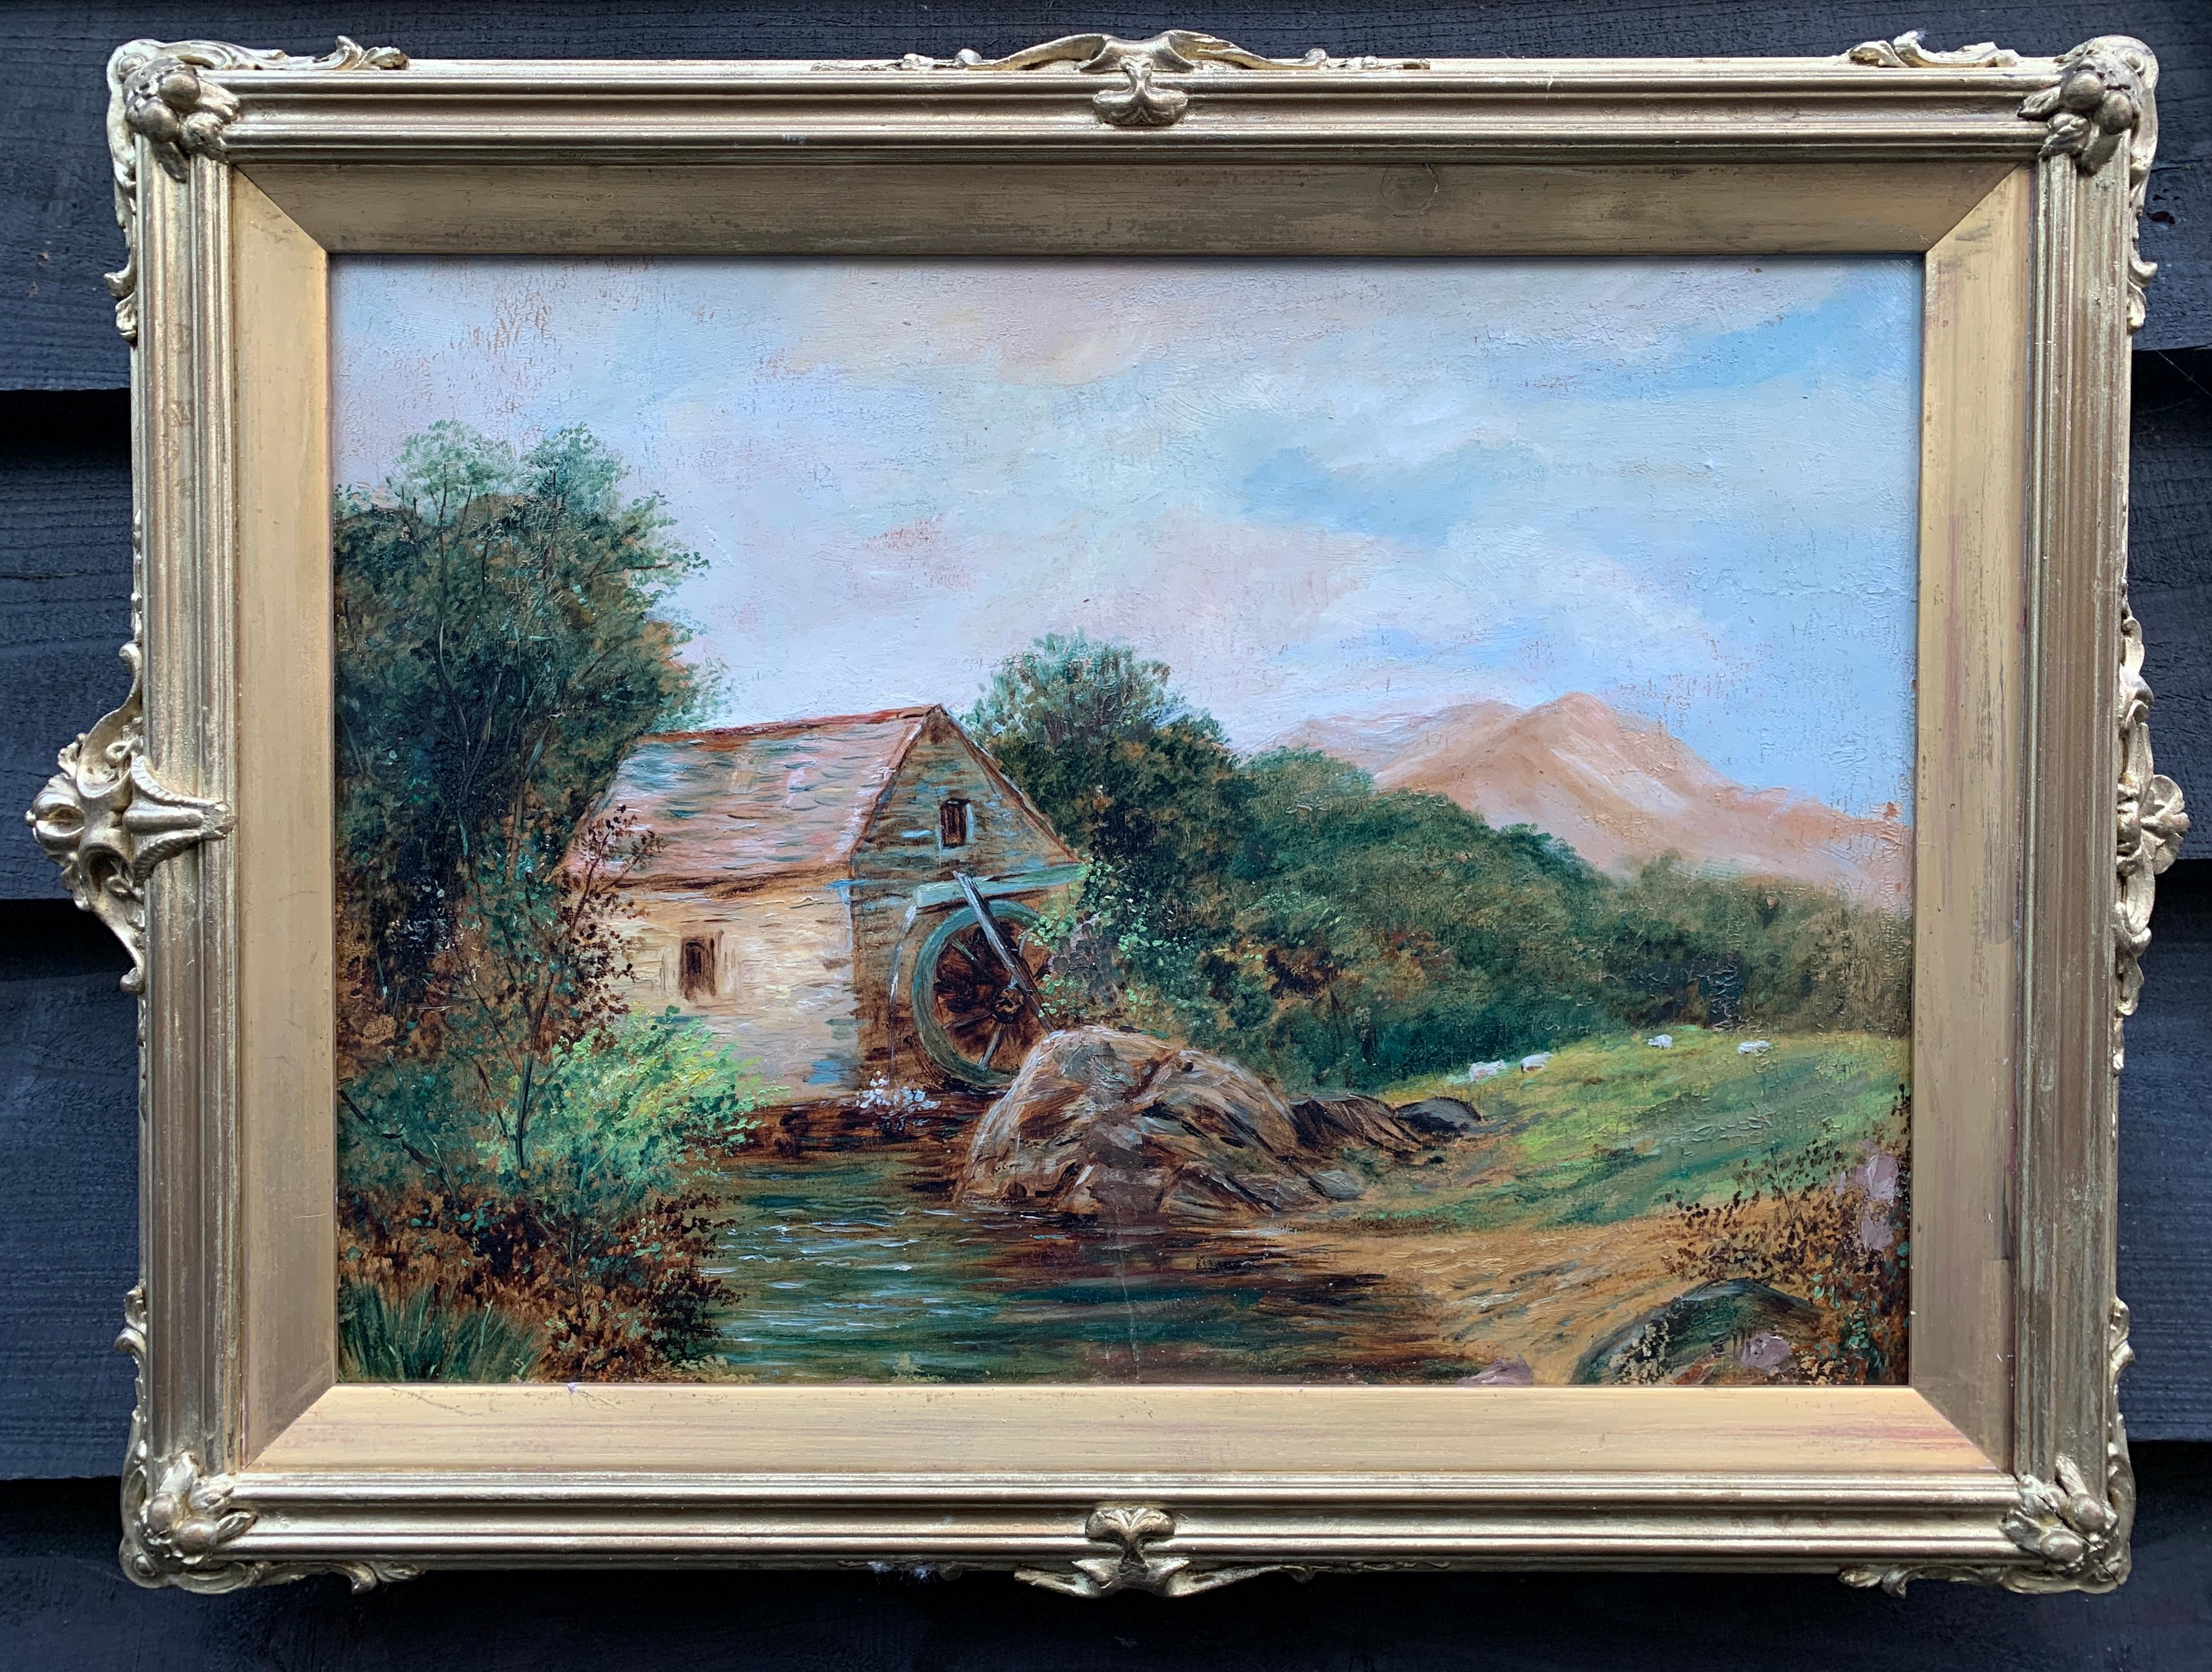 R.Ellis Figurative Painting - Antique 19th century English landscape, Watermill, trees, mountain by a stream 